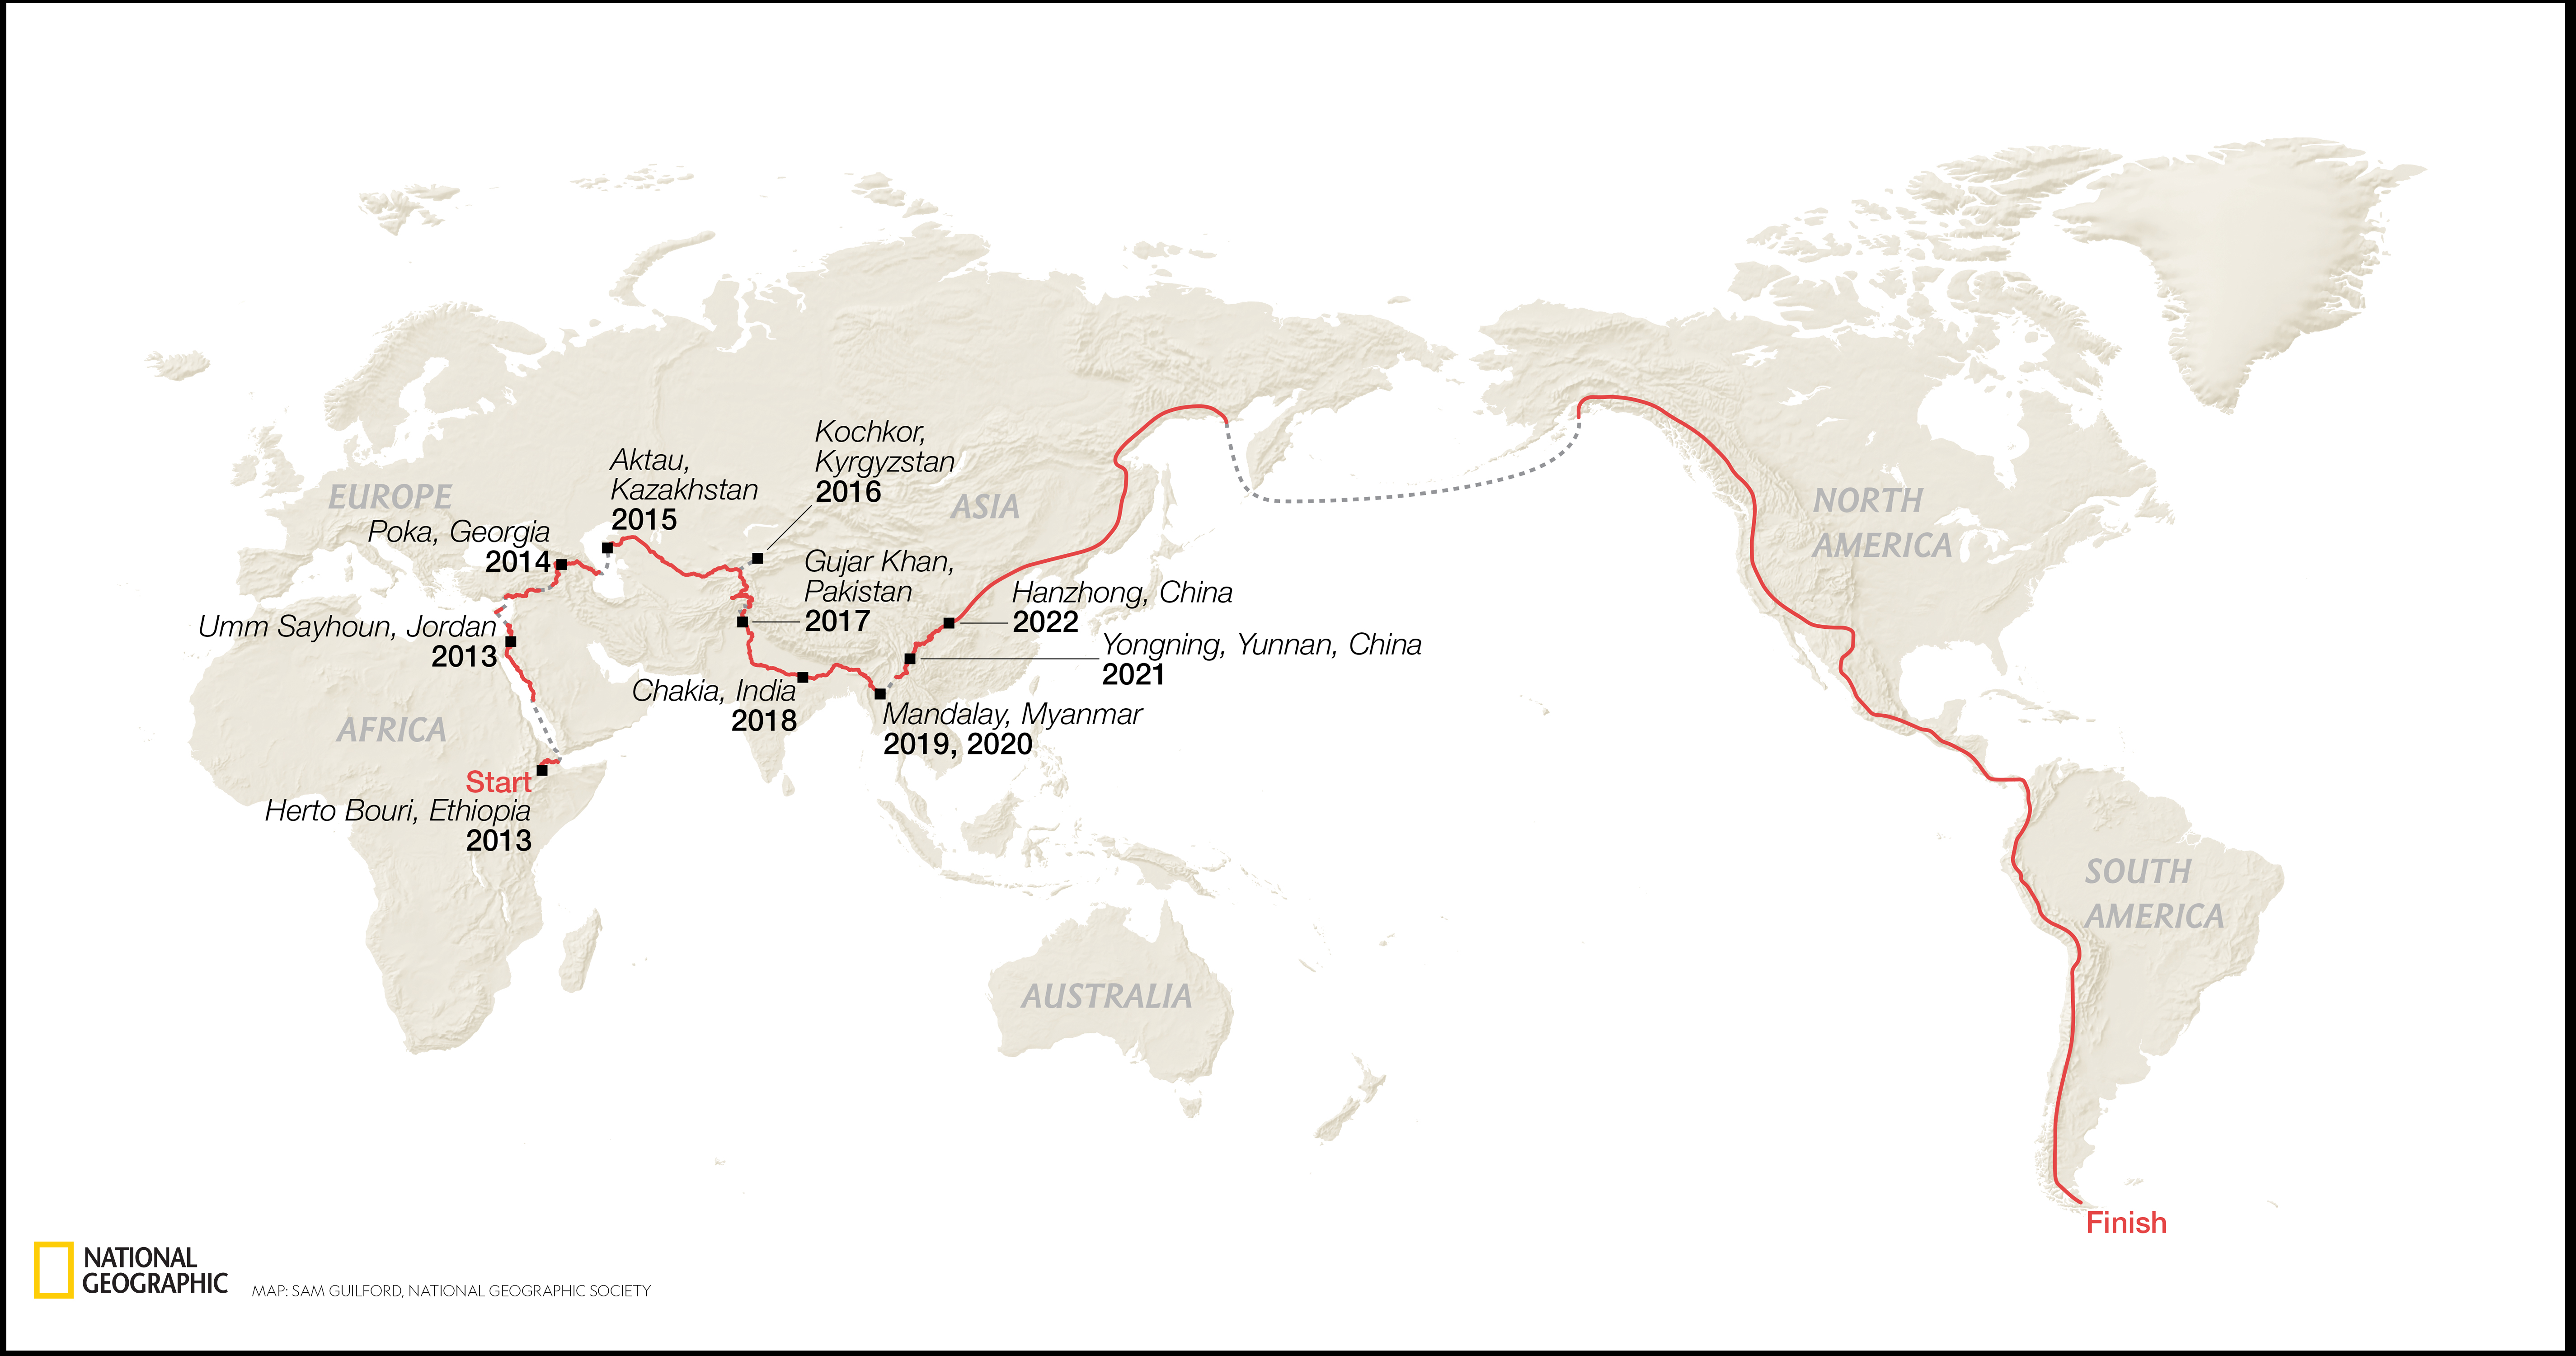 A map depicting Paul Salopek's Out of Eden Walk across the globe retracing the steps of our ancestors